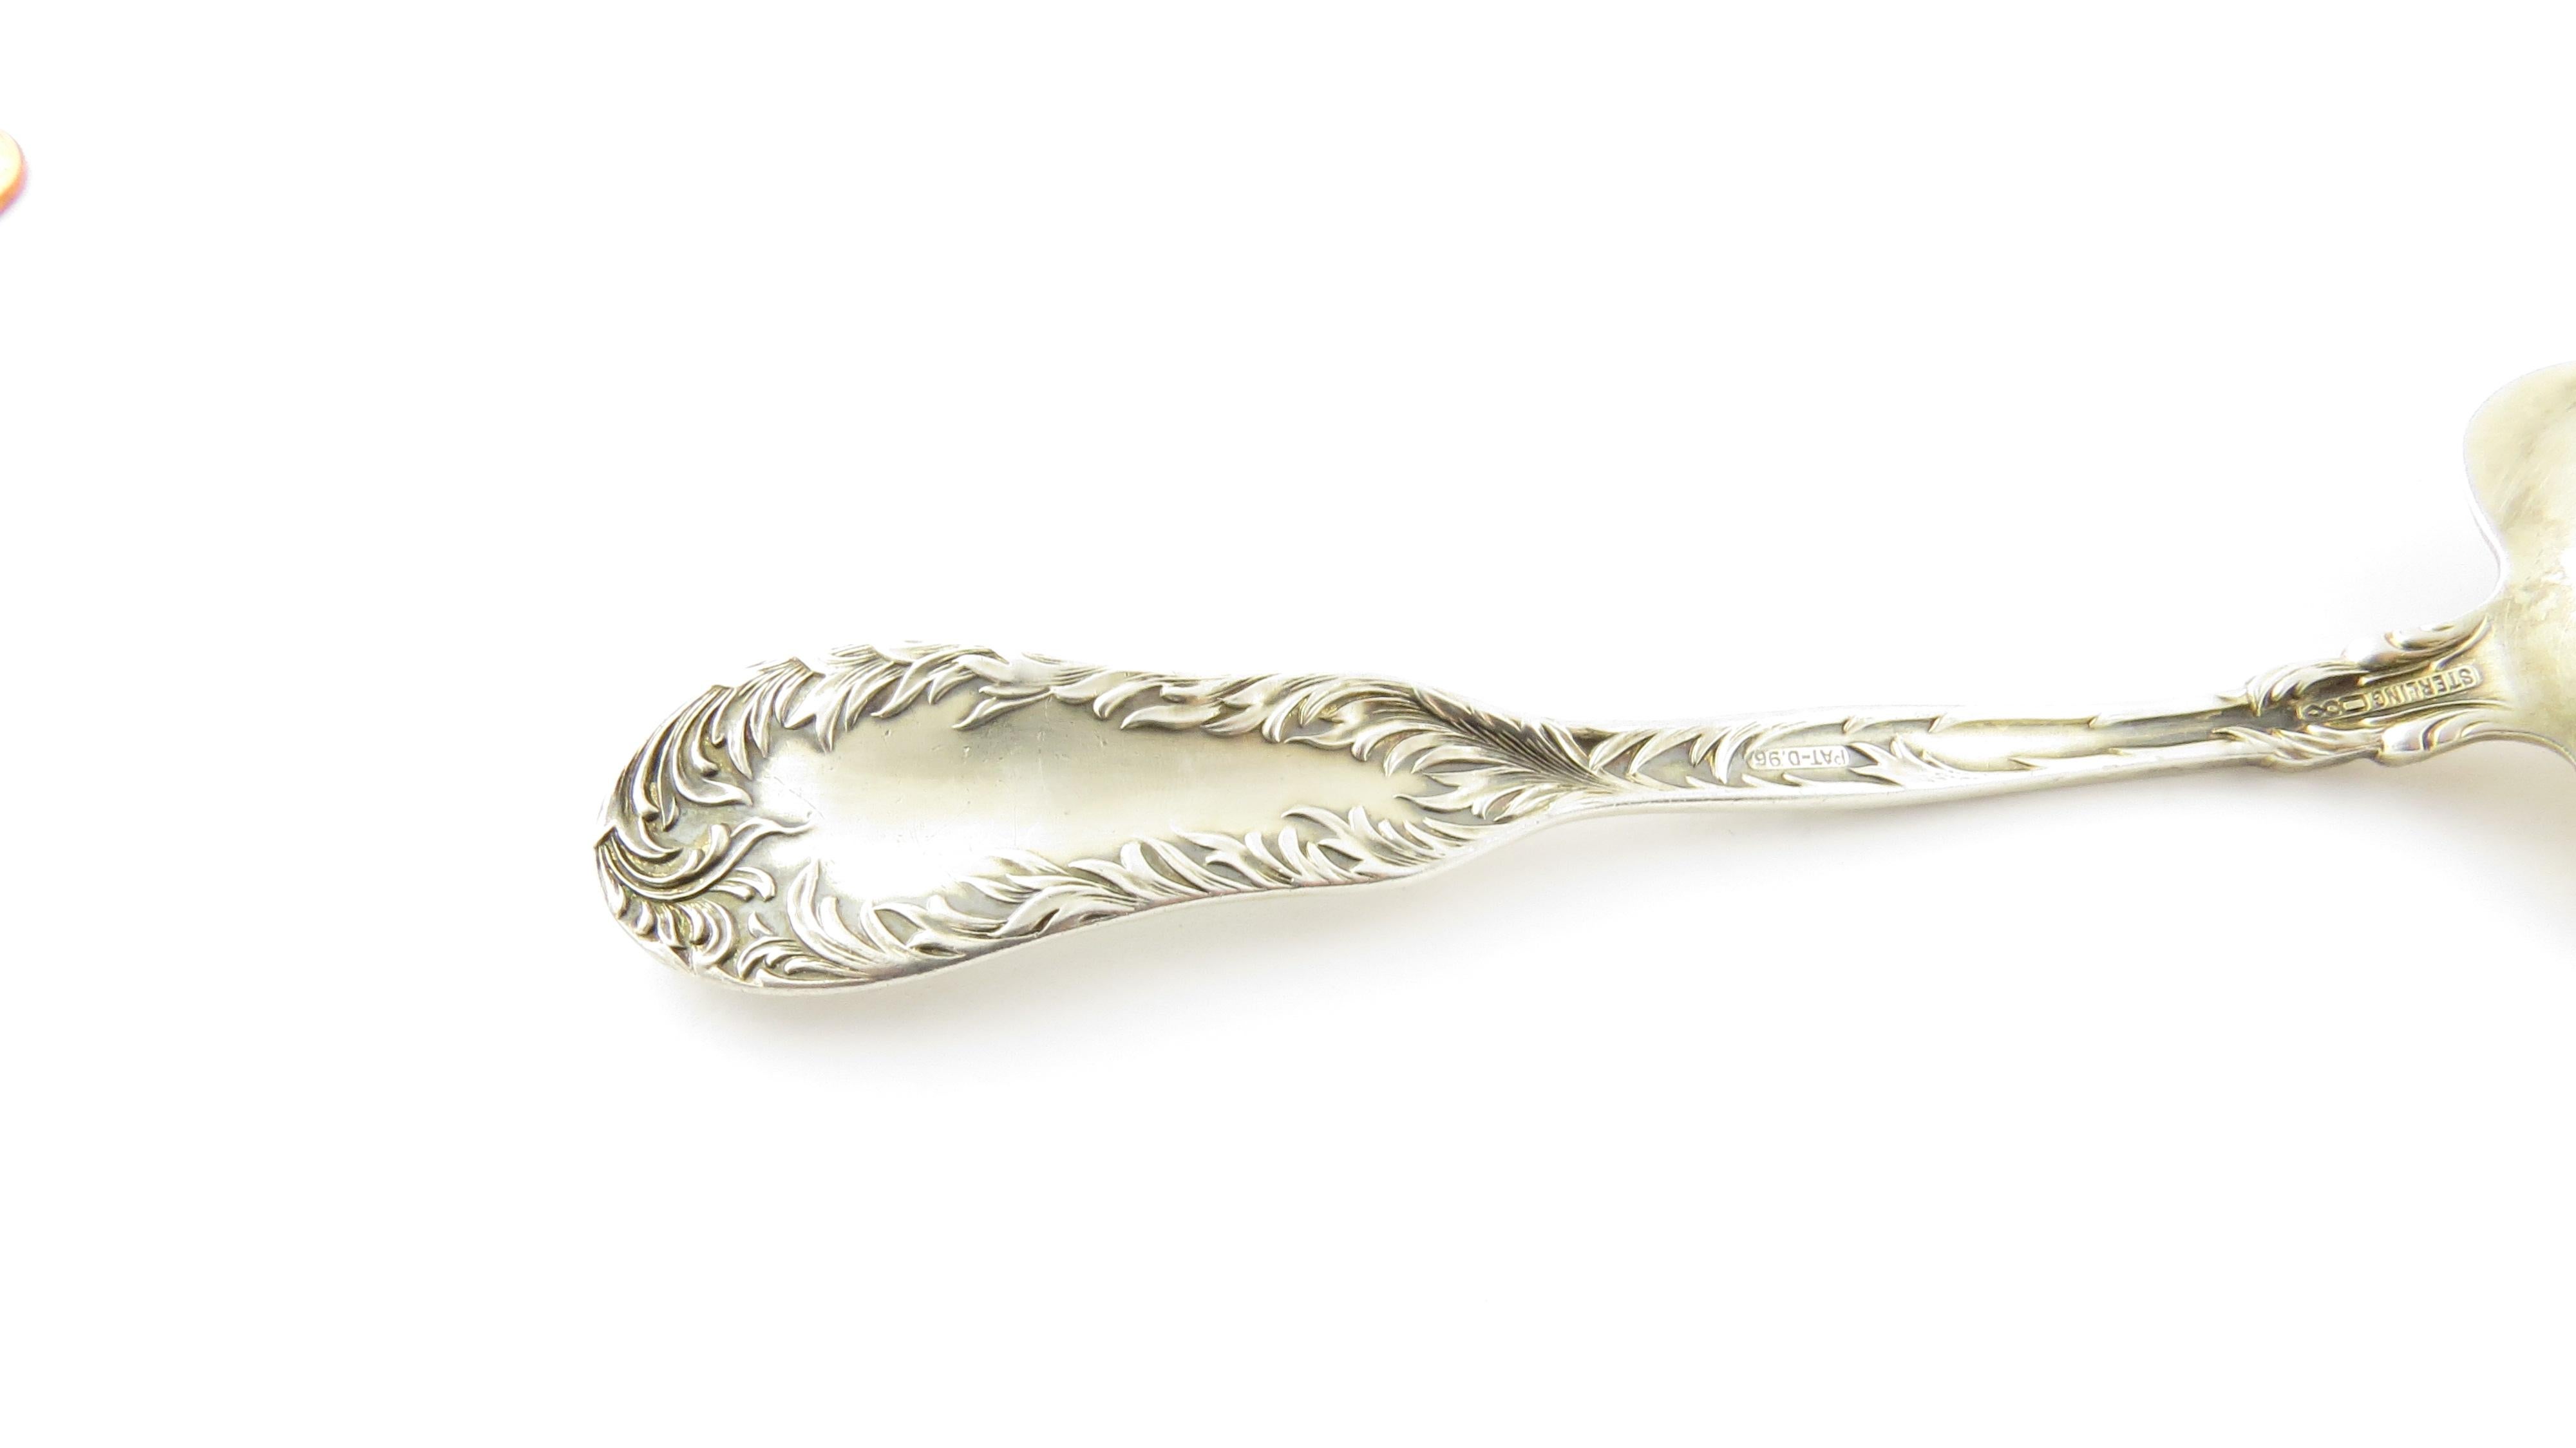 Dominick & Haff No.10 Sterling Silver Enameled Gilt Small Berry Spoon For Sale 2